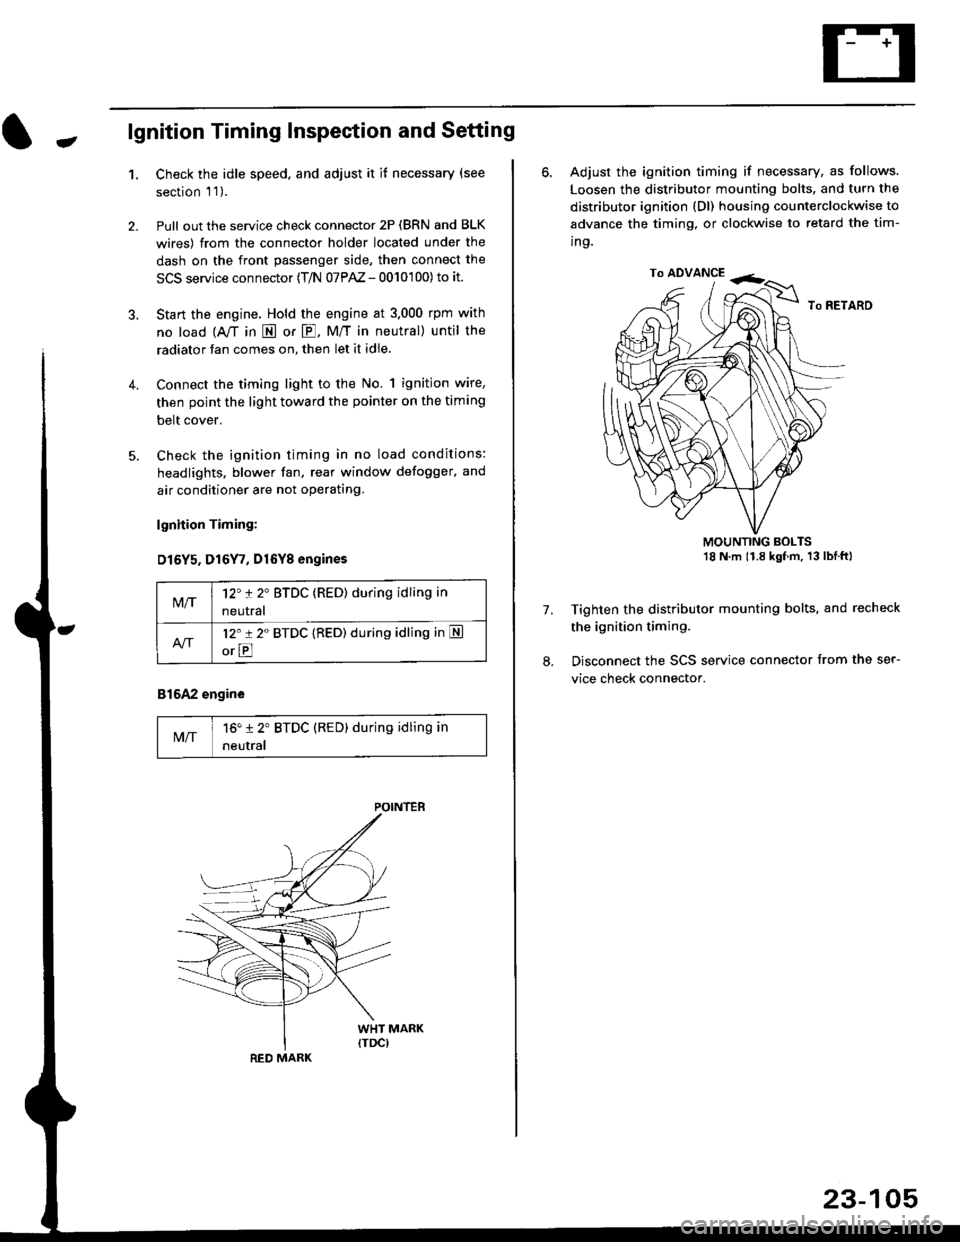 HONDA CIVIC 1996 6.G Owners Manual -lgnition Timing Inspection and Setting
1.Check the idle speed, and adjust it it necessary (see
section l 1 ).
Pull out the service check connector 2P (BRN and BLK
wires) from the connector holder l